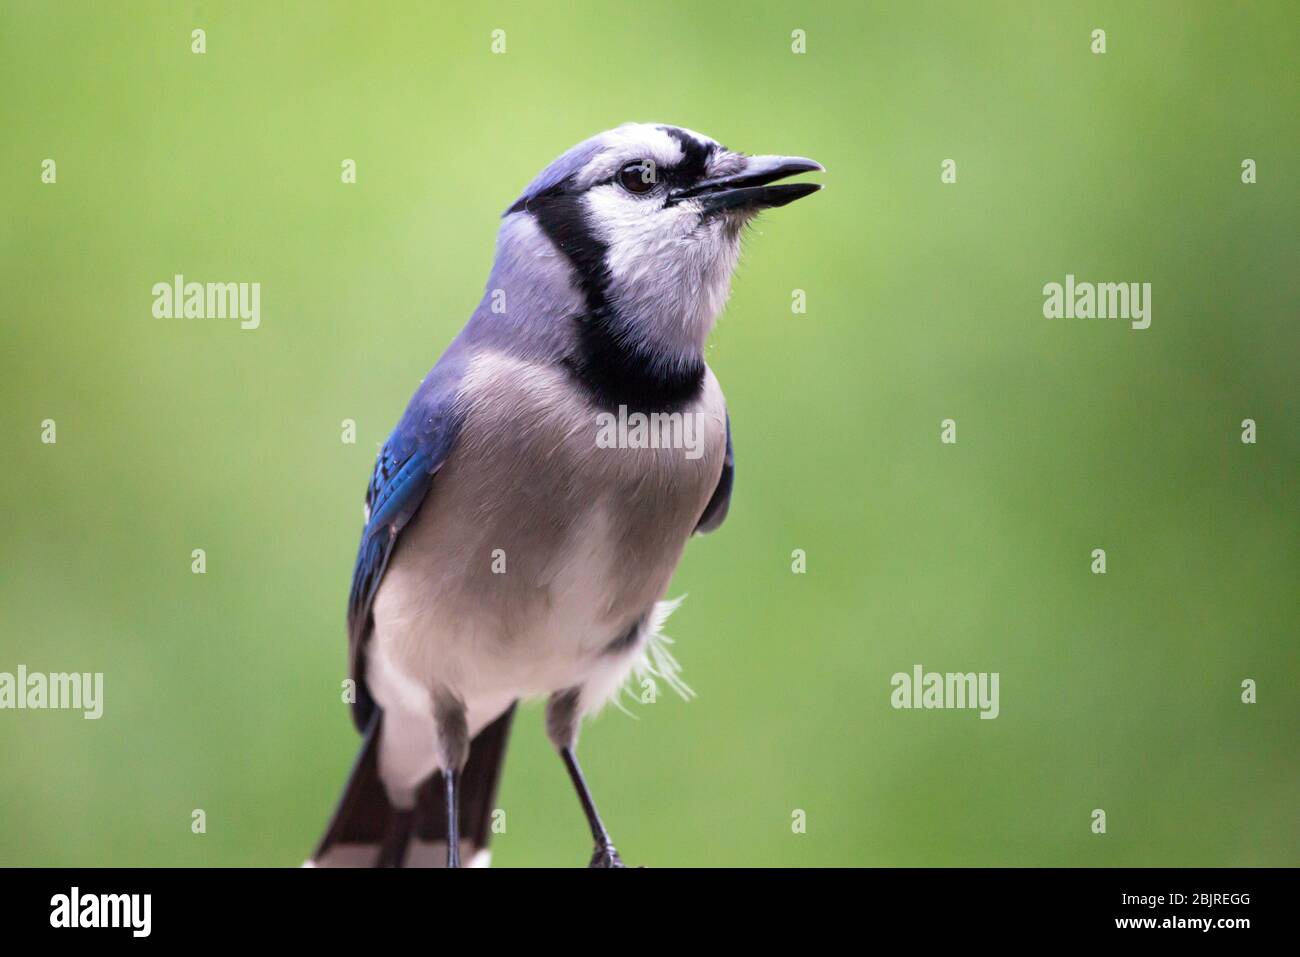 Closeup of a perched Blue Jay bird with a bright green background. Stock Photo